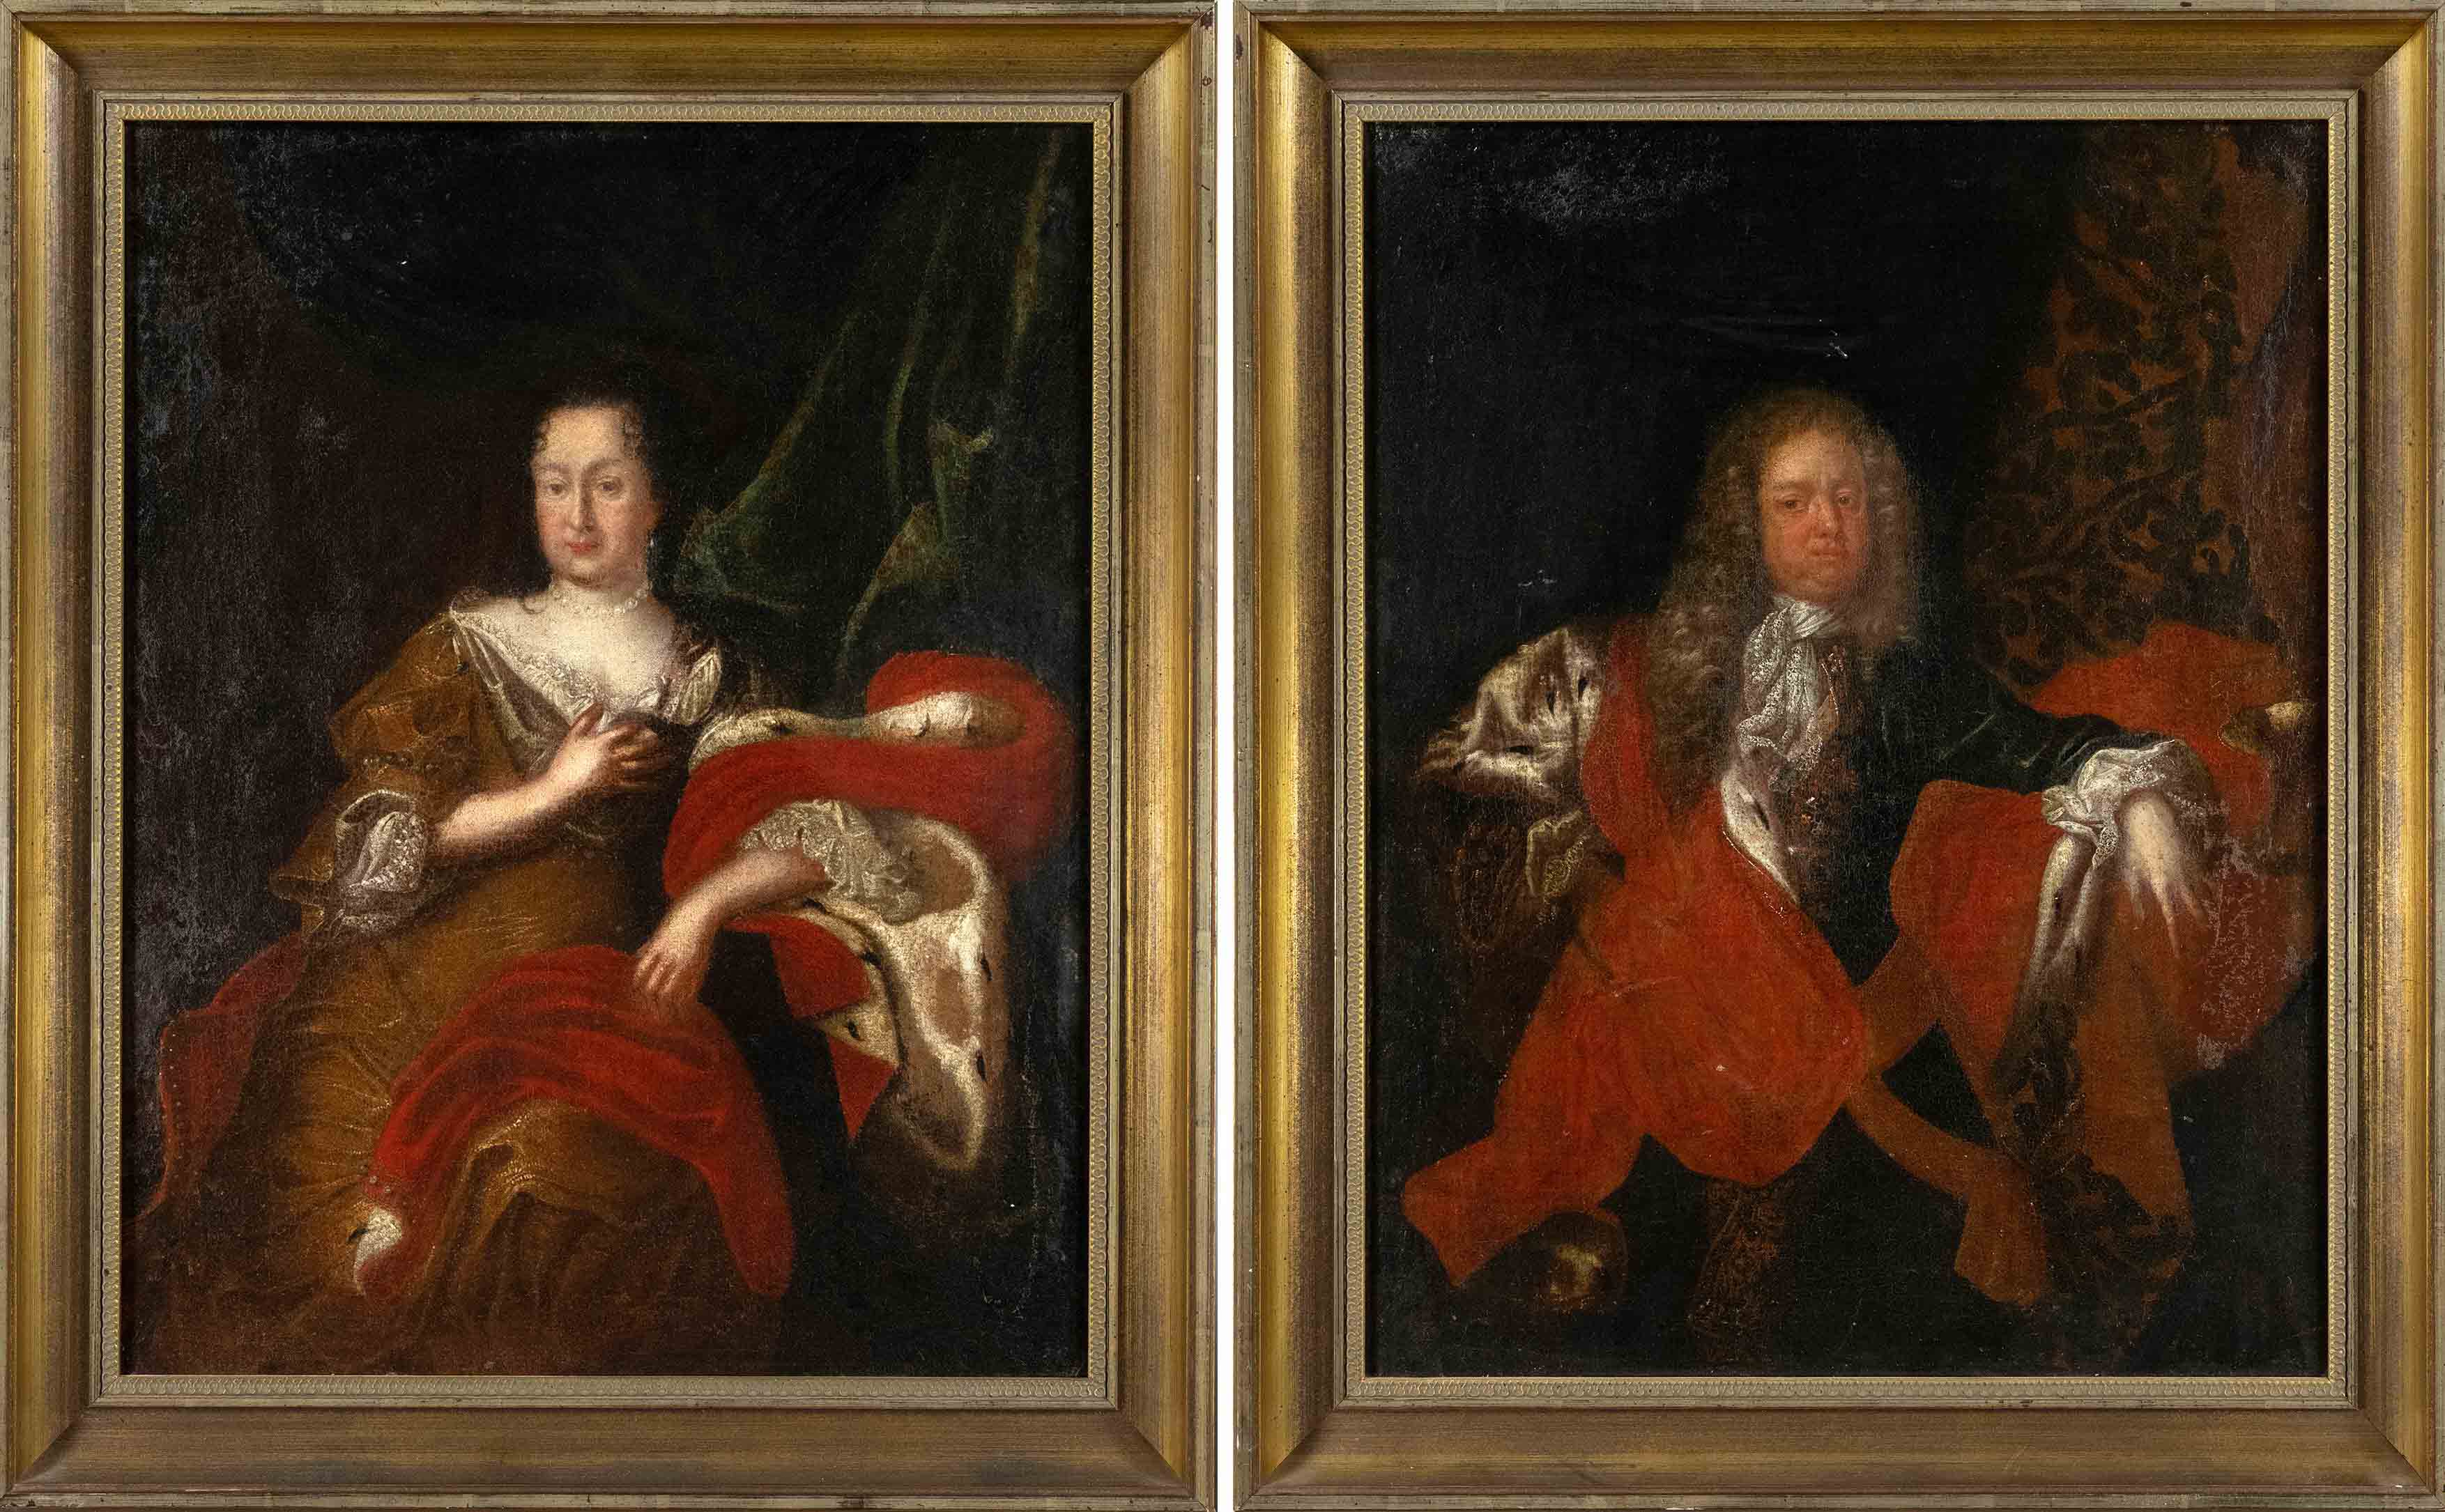 Court portrait painter of the 17th century, pair of portraits of rulers in front of brocade